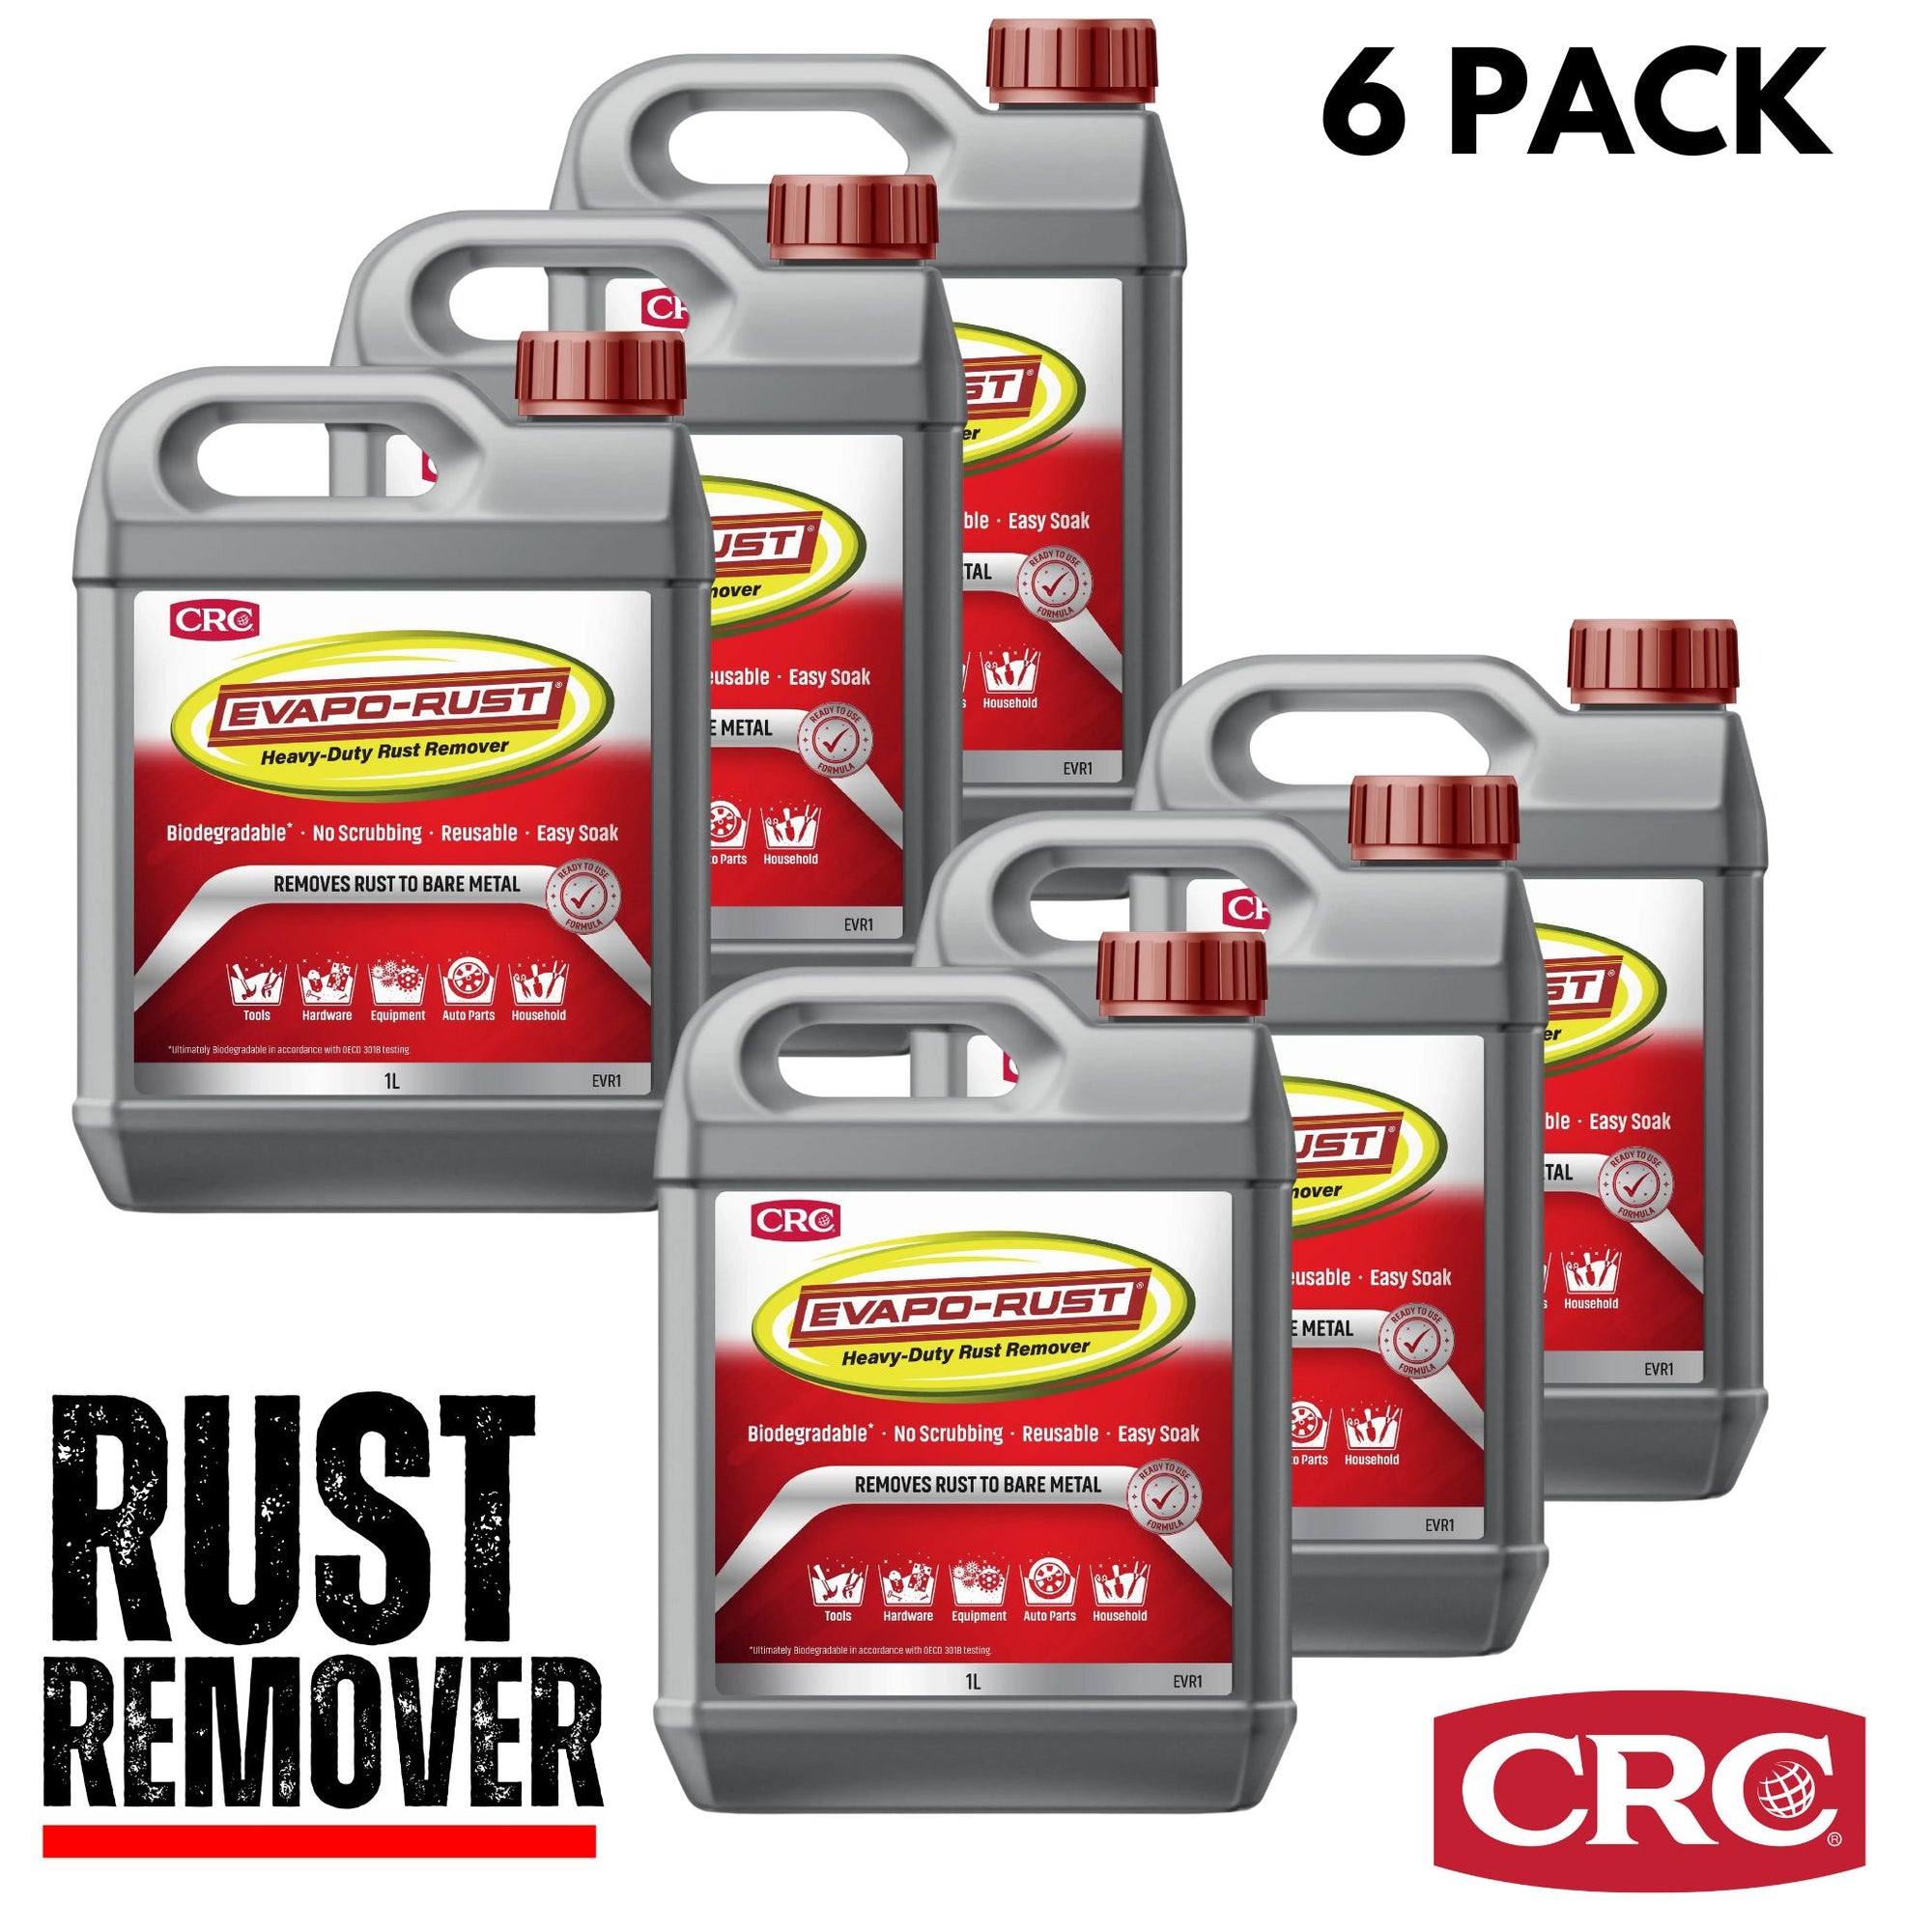 CRC Evapo-Rust Heavy Duty Rust Remover ready to use 1L | EVR1 (6 PACK) - South East Clearance Centre